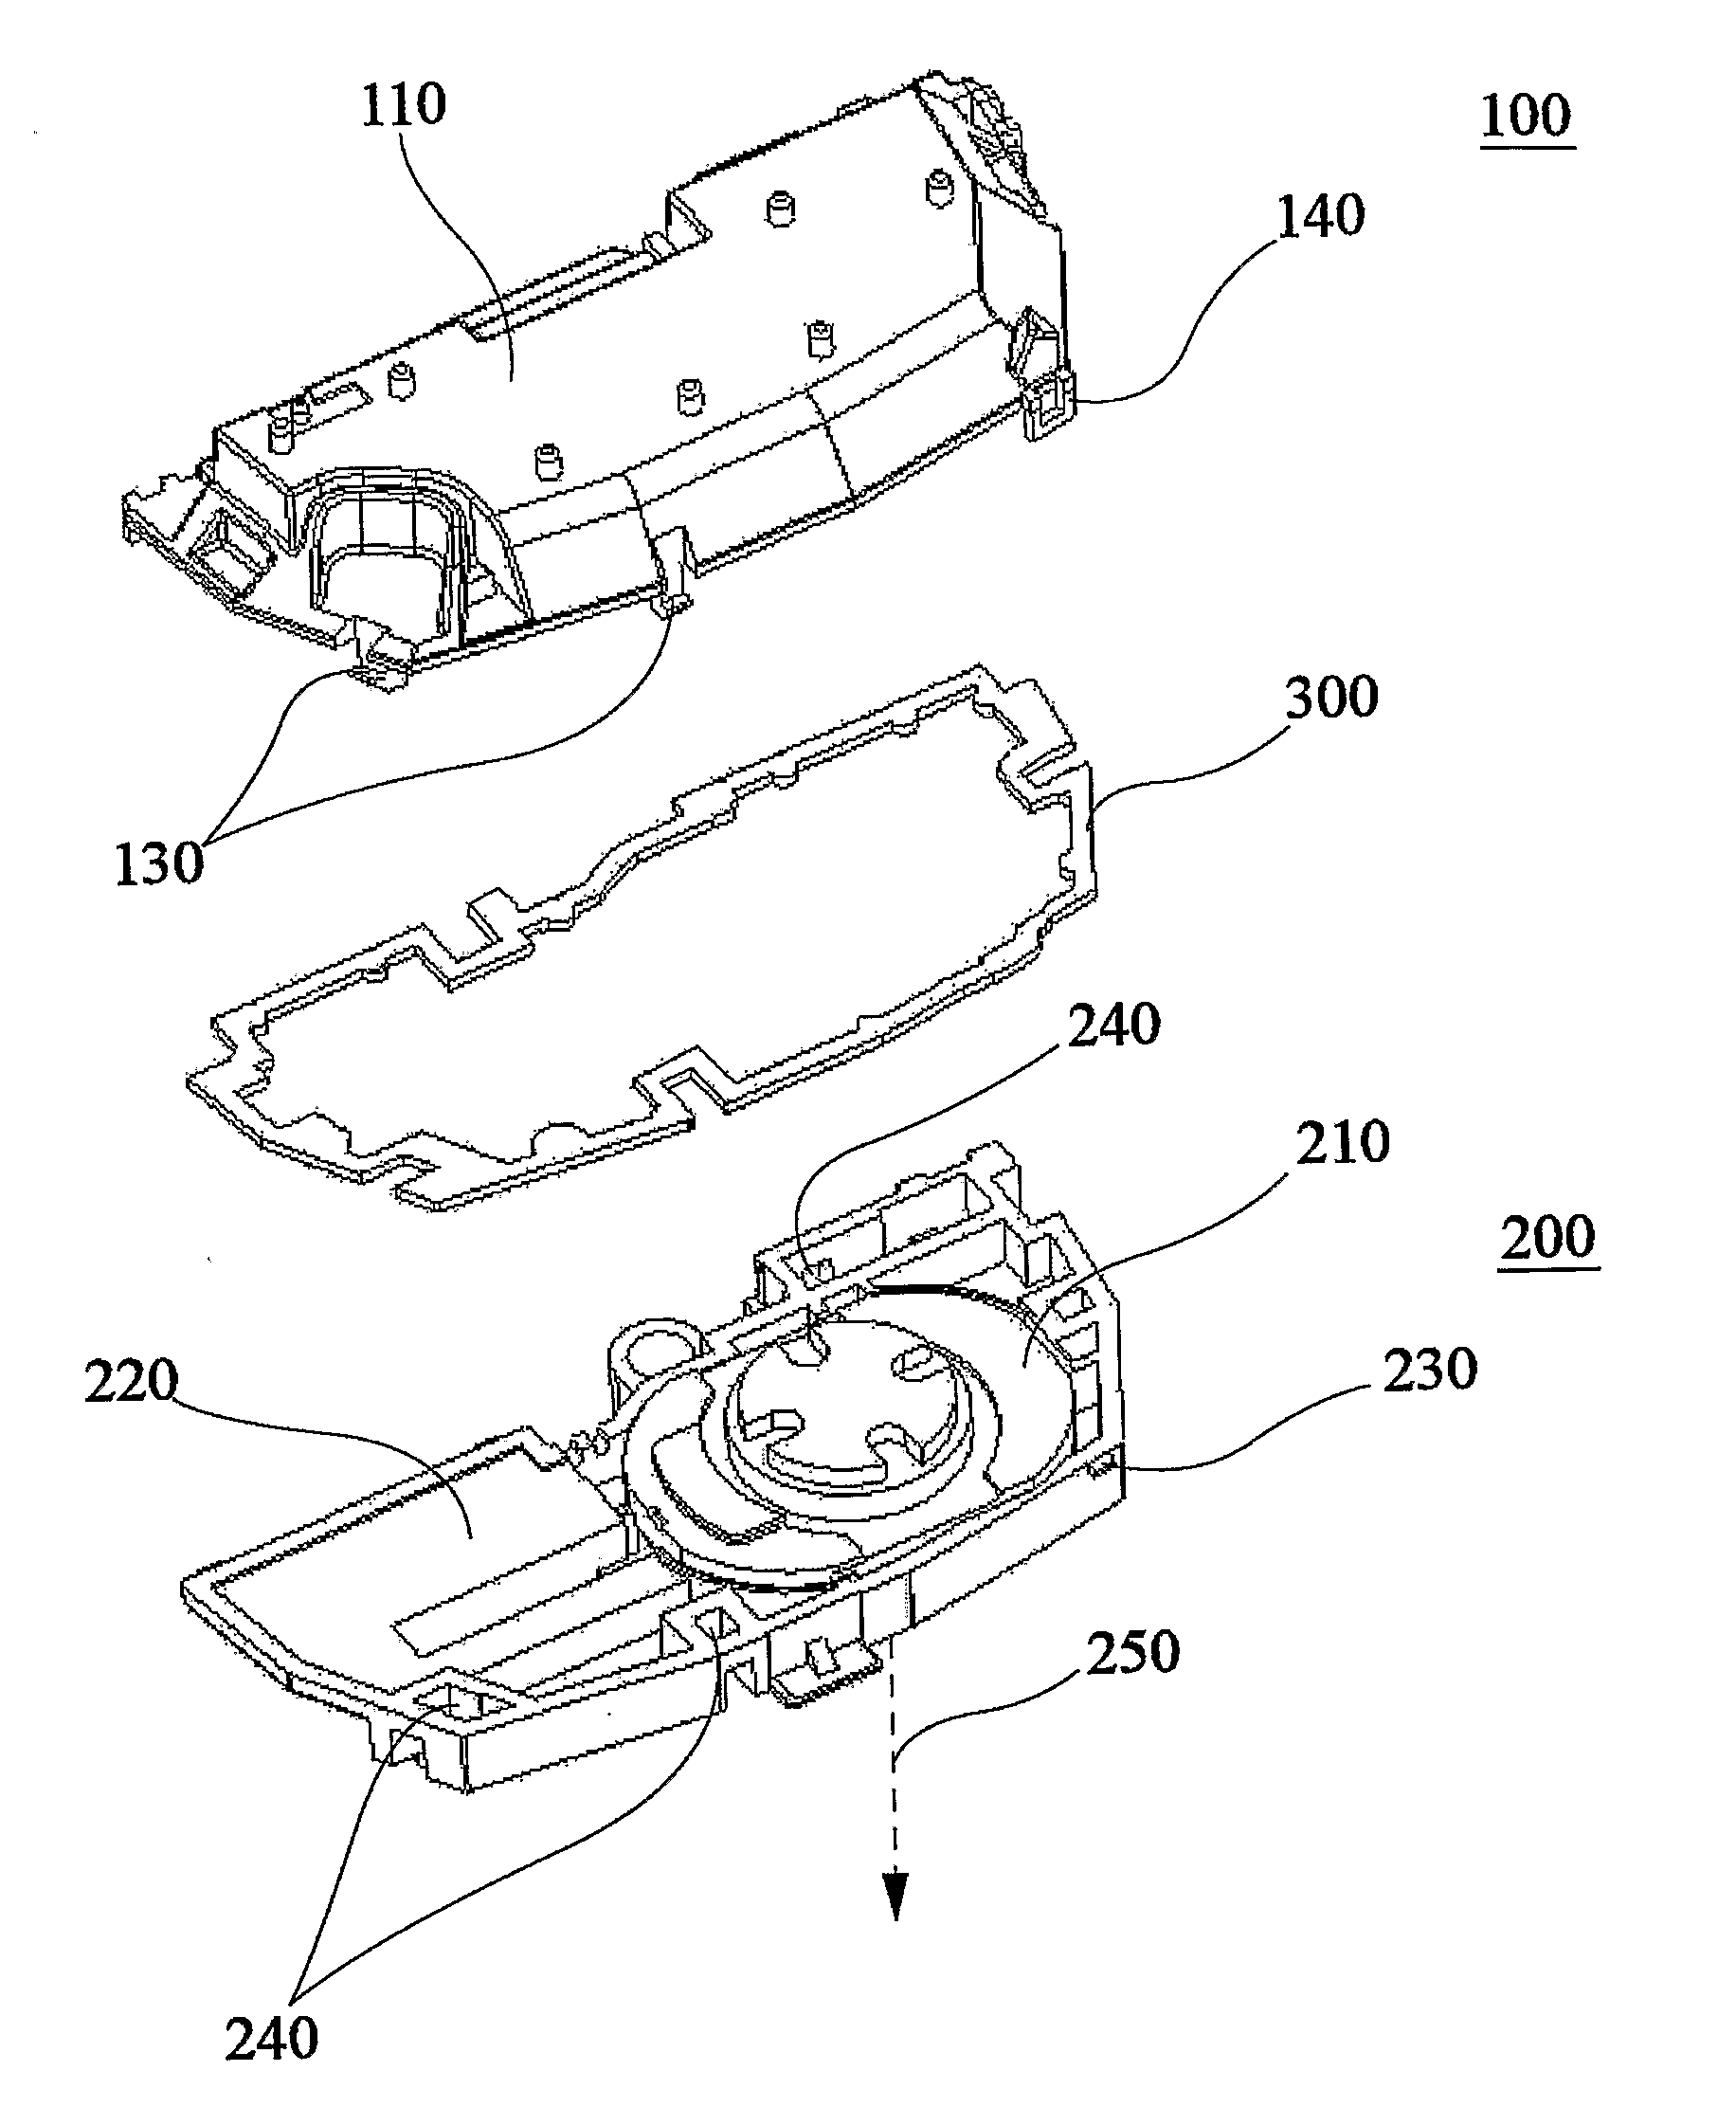 Antenna and speaker assembly and wireless communication device